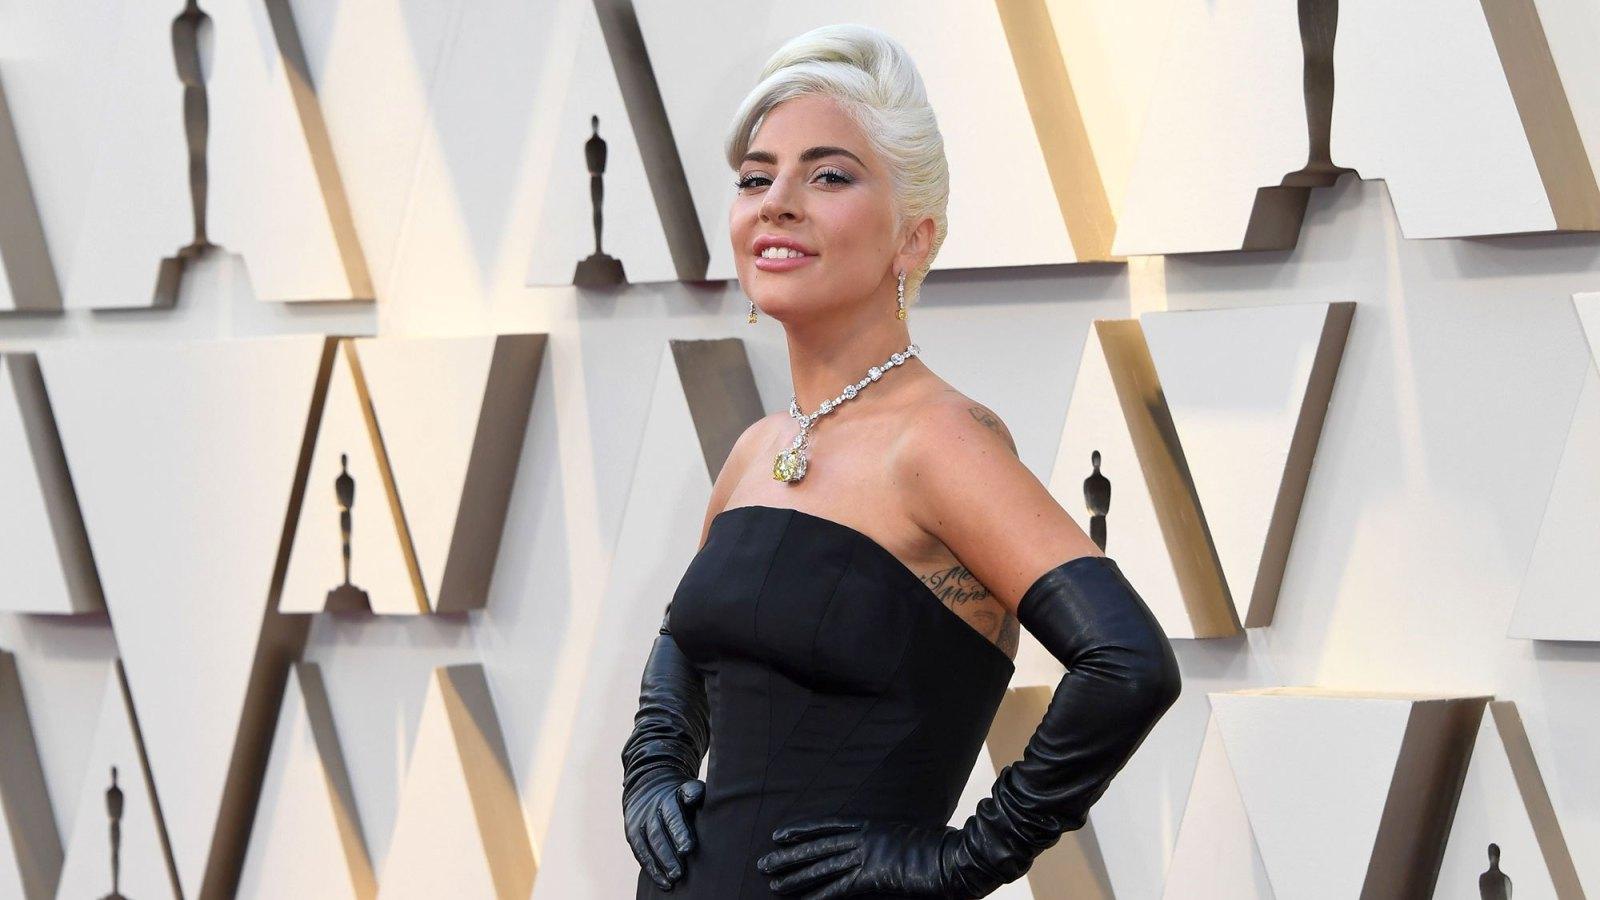 Oscars 2019: Lady Gaga's Necklace Draws 'How to Lose a Guy in 10